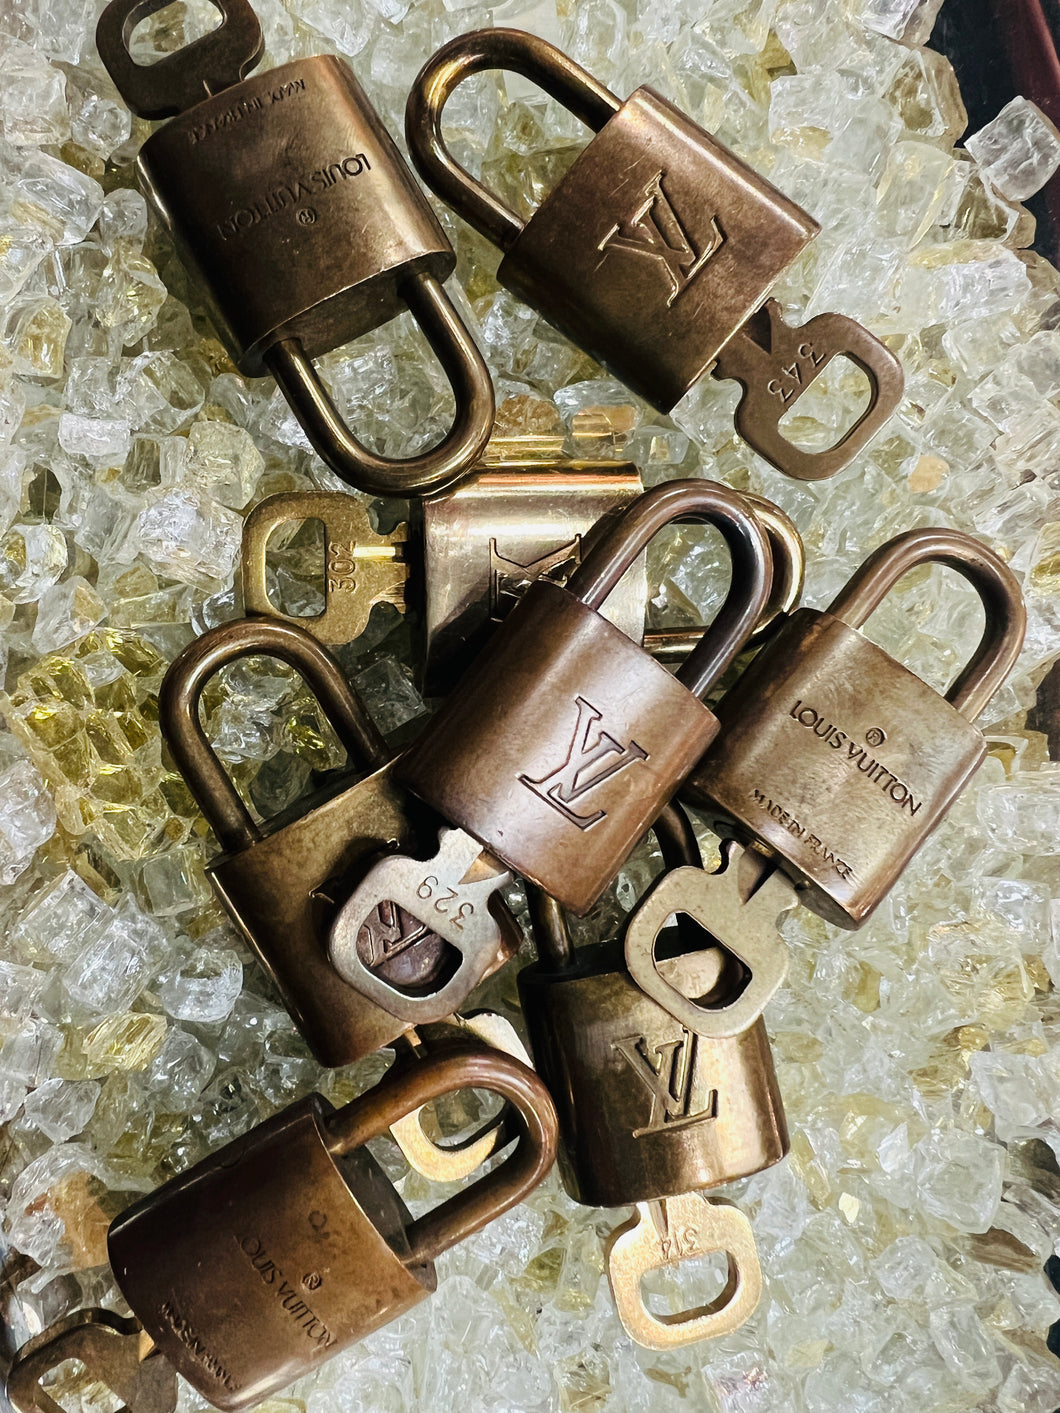 louis vuitton lock and key authentic